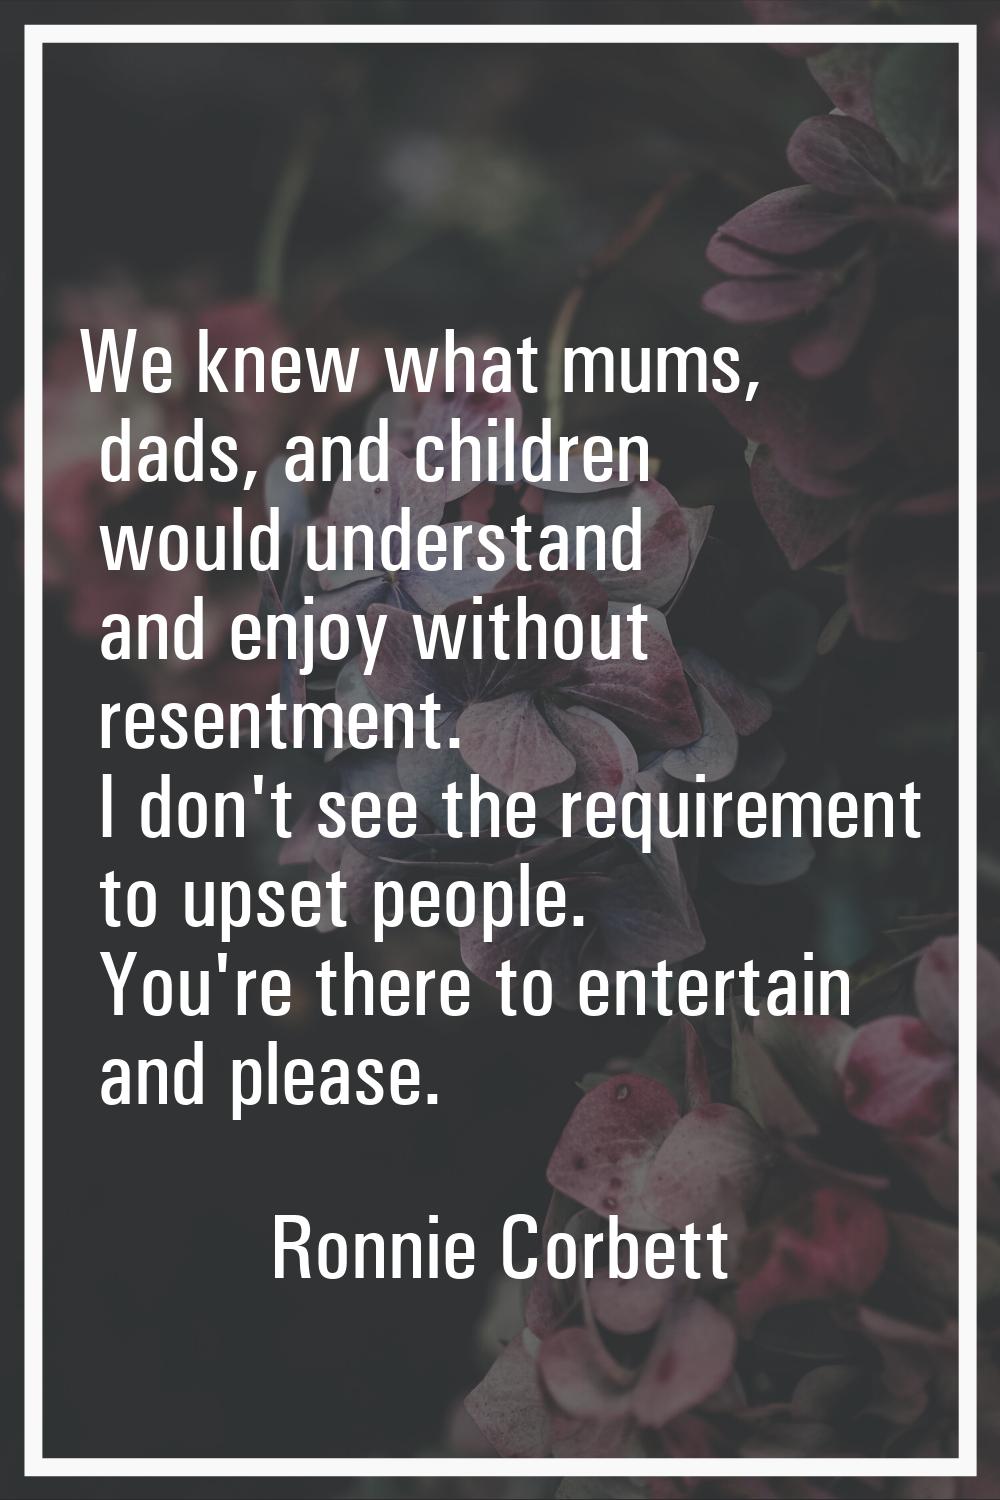 We knew what mums, dads, and children would understand and enjoy without resentment. I don't see th